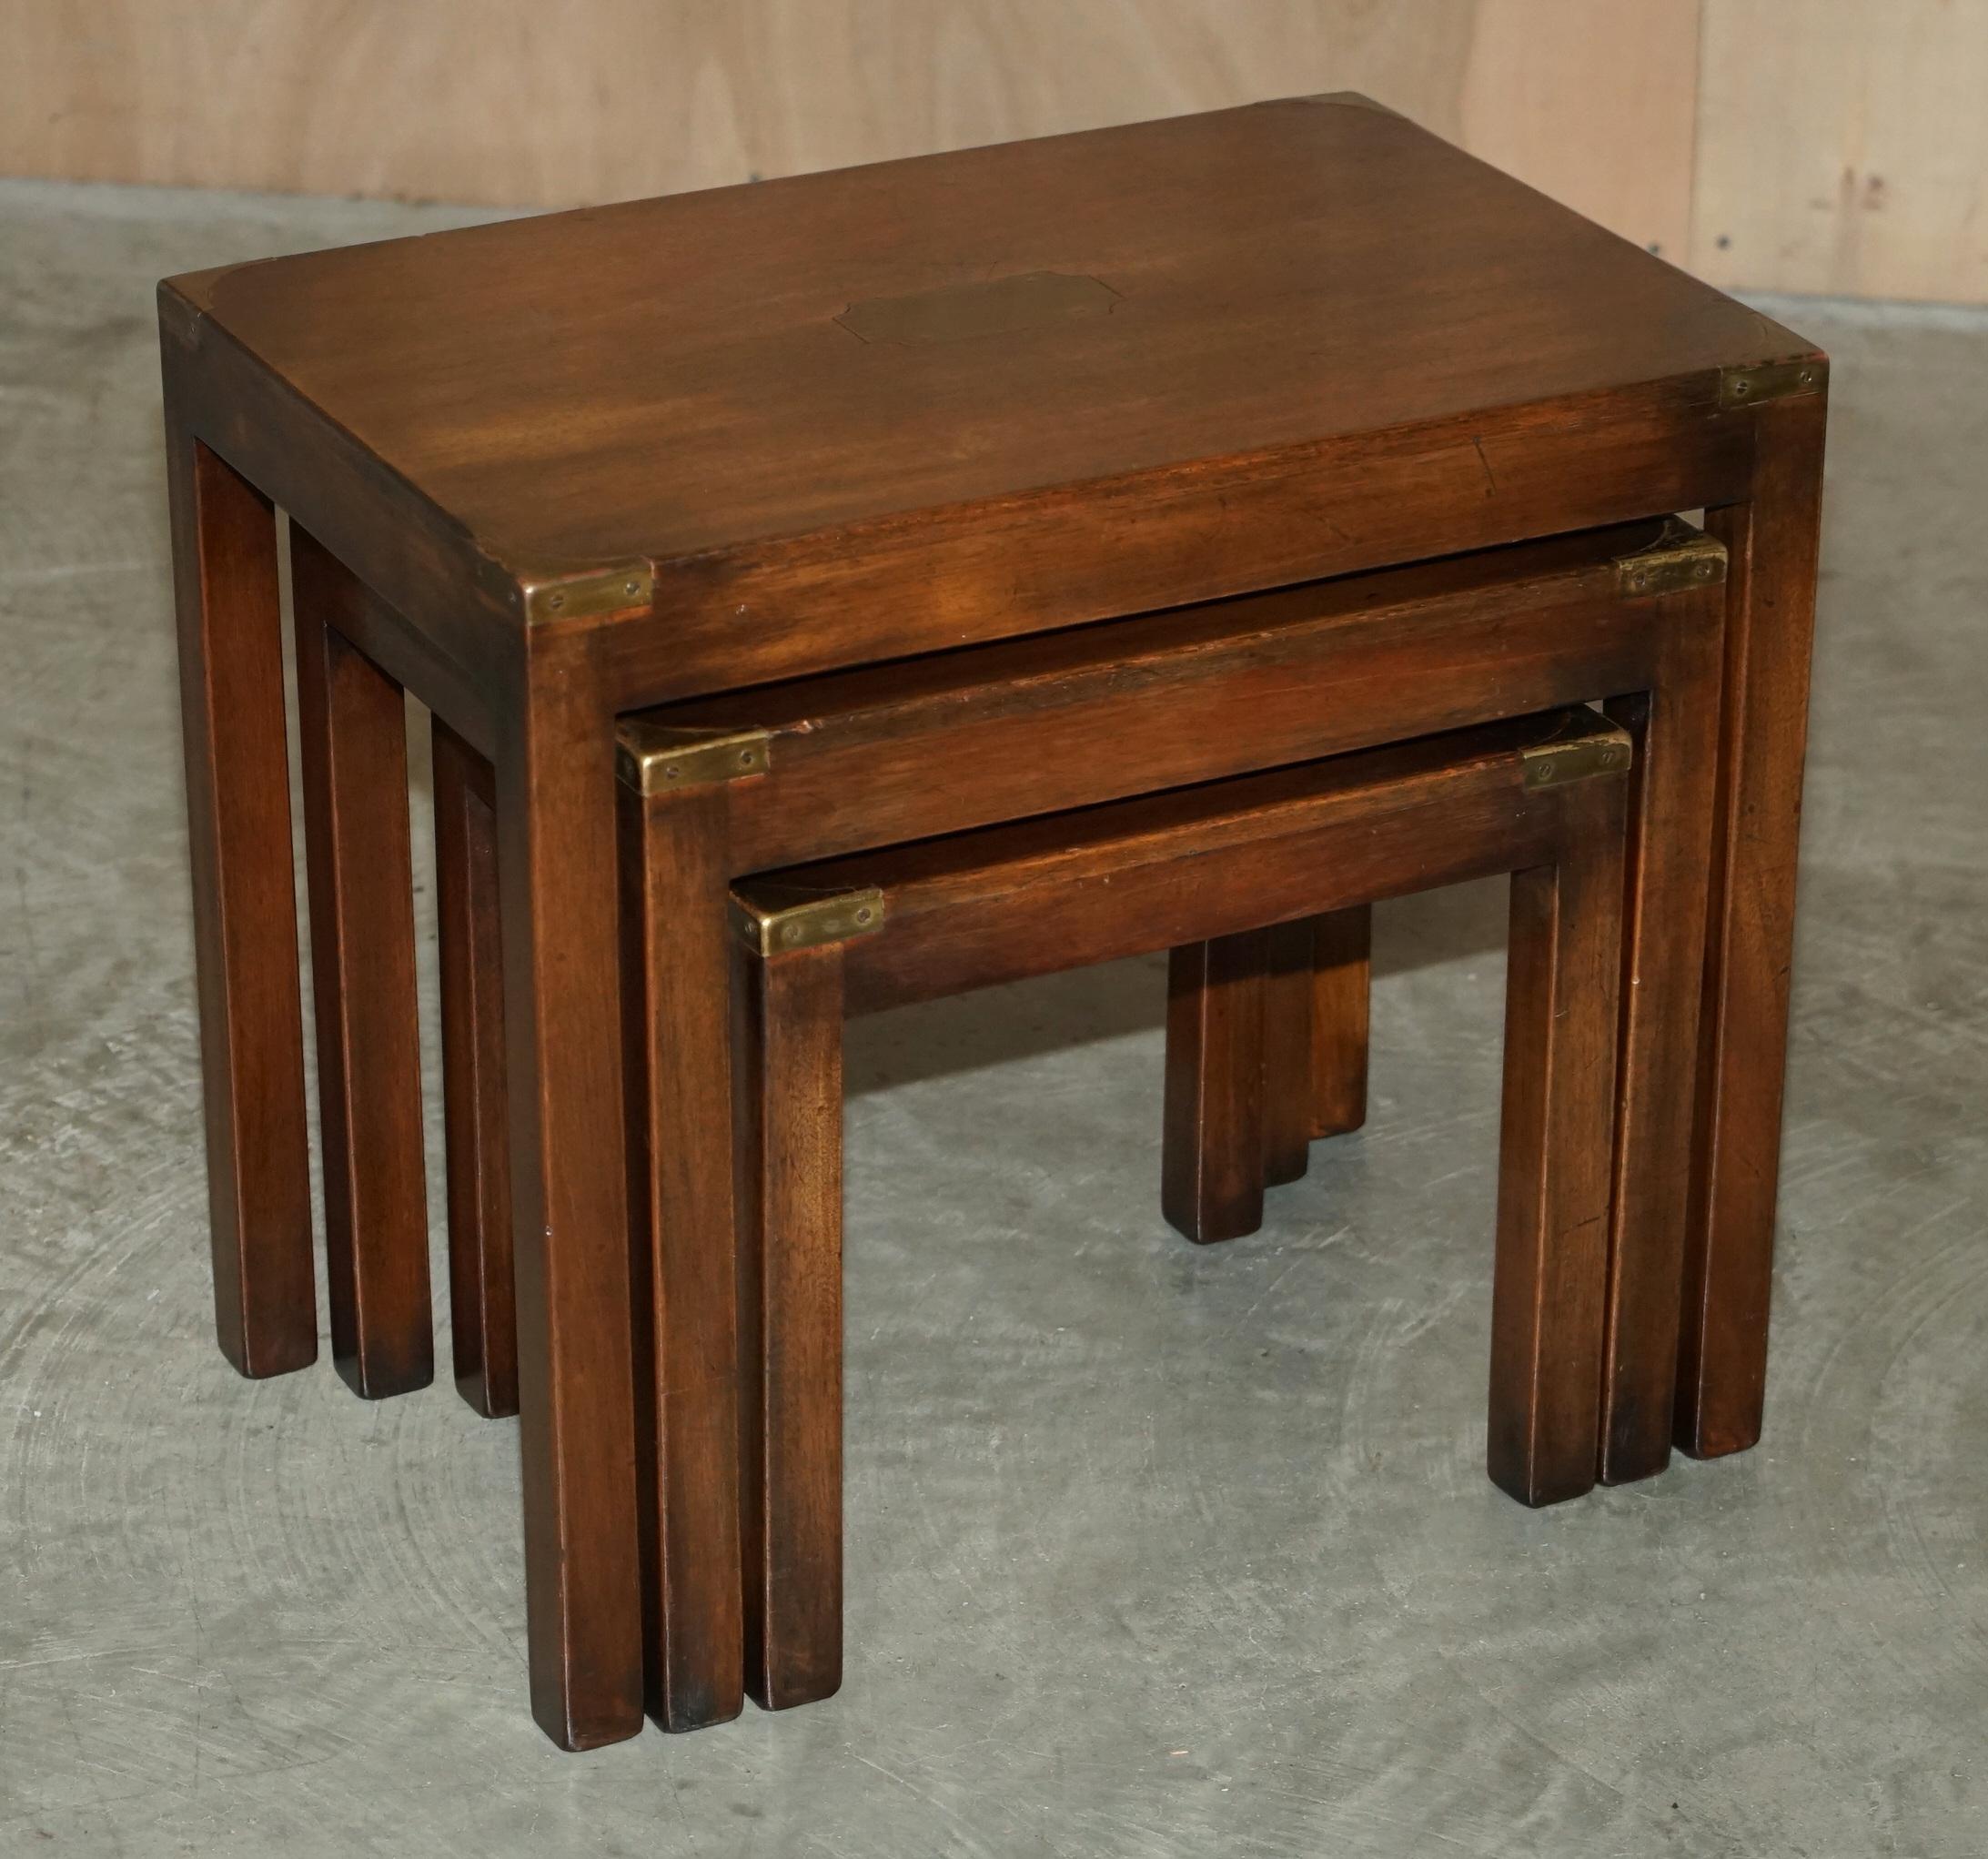 Hand-Crafted Lovely Harrods Kennedy Coffee & Side Table Nest of Tables Military Campaign For Sale